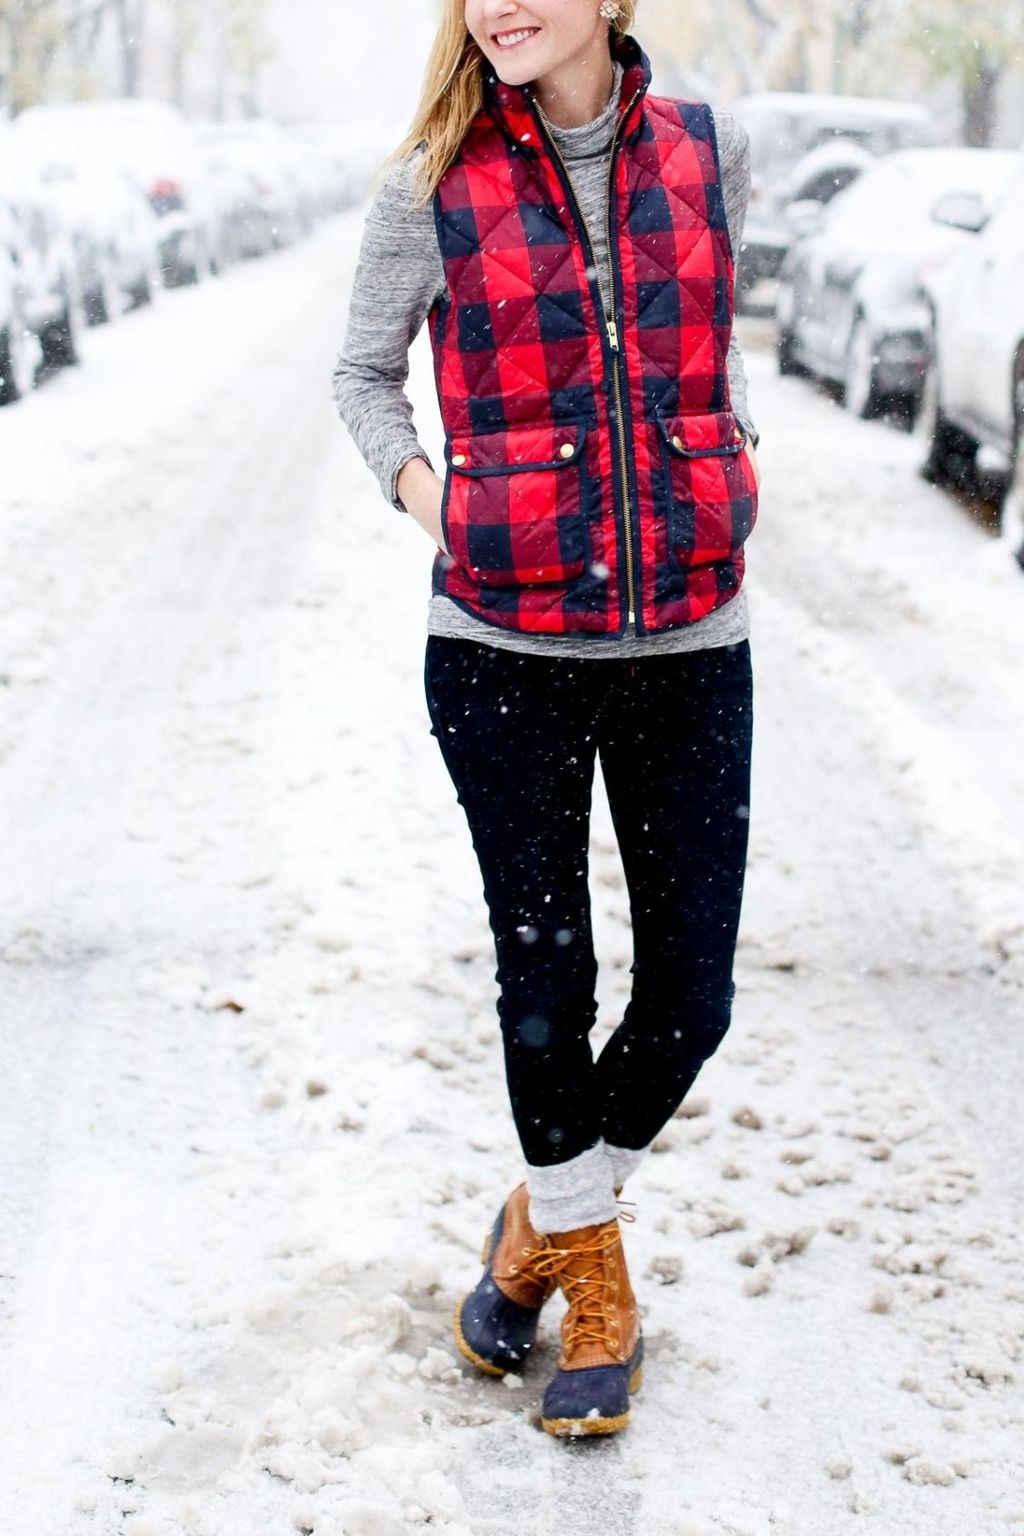 41 Incredible Winter Outfits Ideas With Leg Warmers